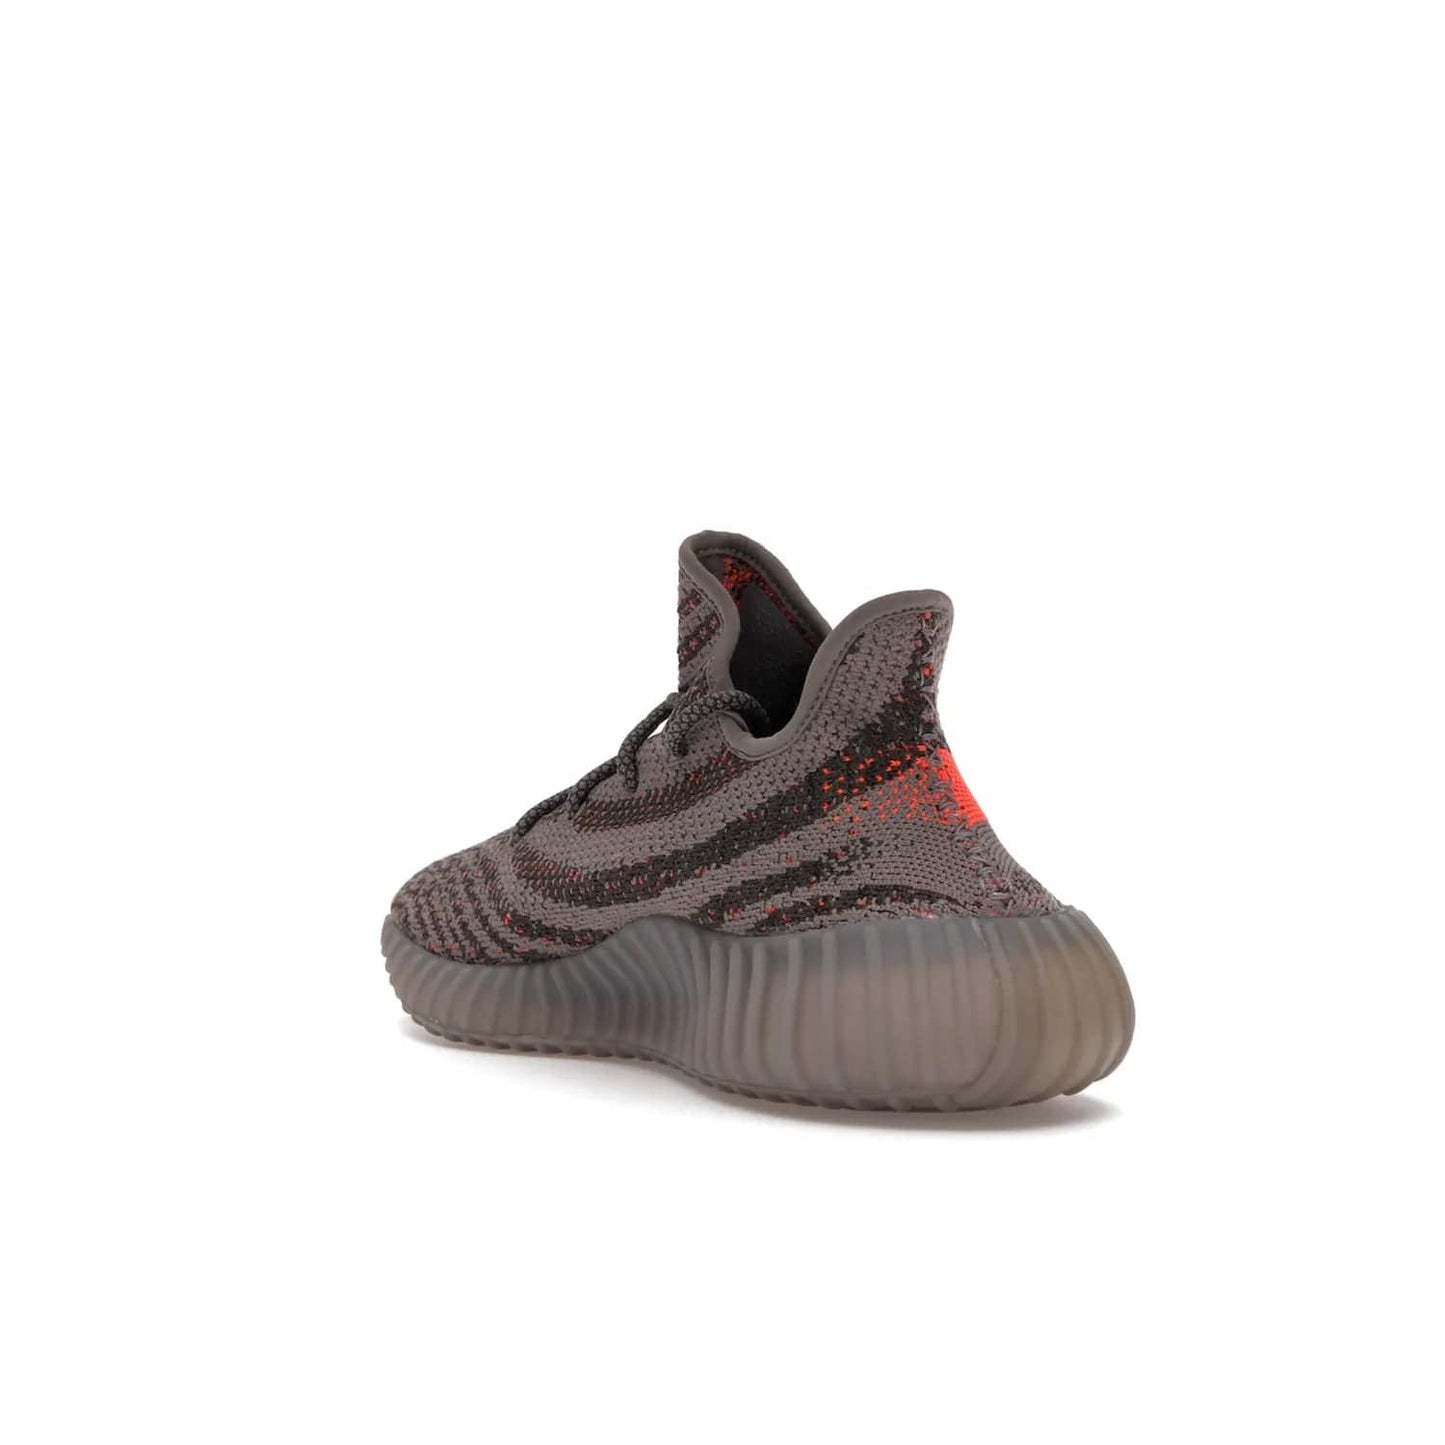 adidas Yeezy Boost 350 V2 Beluga Reflective - Image 25 - Only at www.BallersClubKickz.com - Shop the adidas Yeezy Boost 350 V2 Beluga Reflective: a stylish, reflective sneaker that stands out. Featuring Boost sole, Primeknit upper & signature orange stripe. Available Dec 2021.